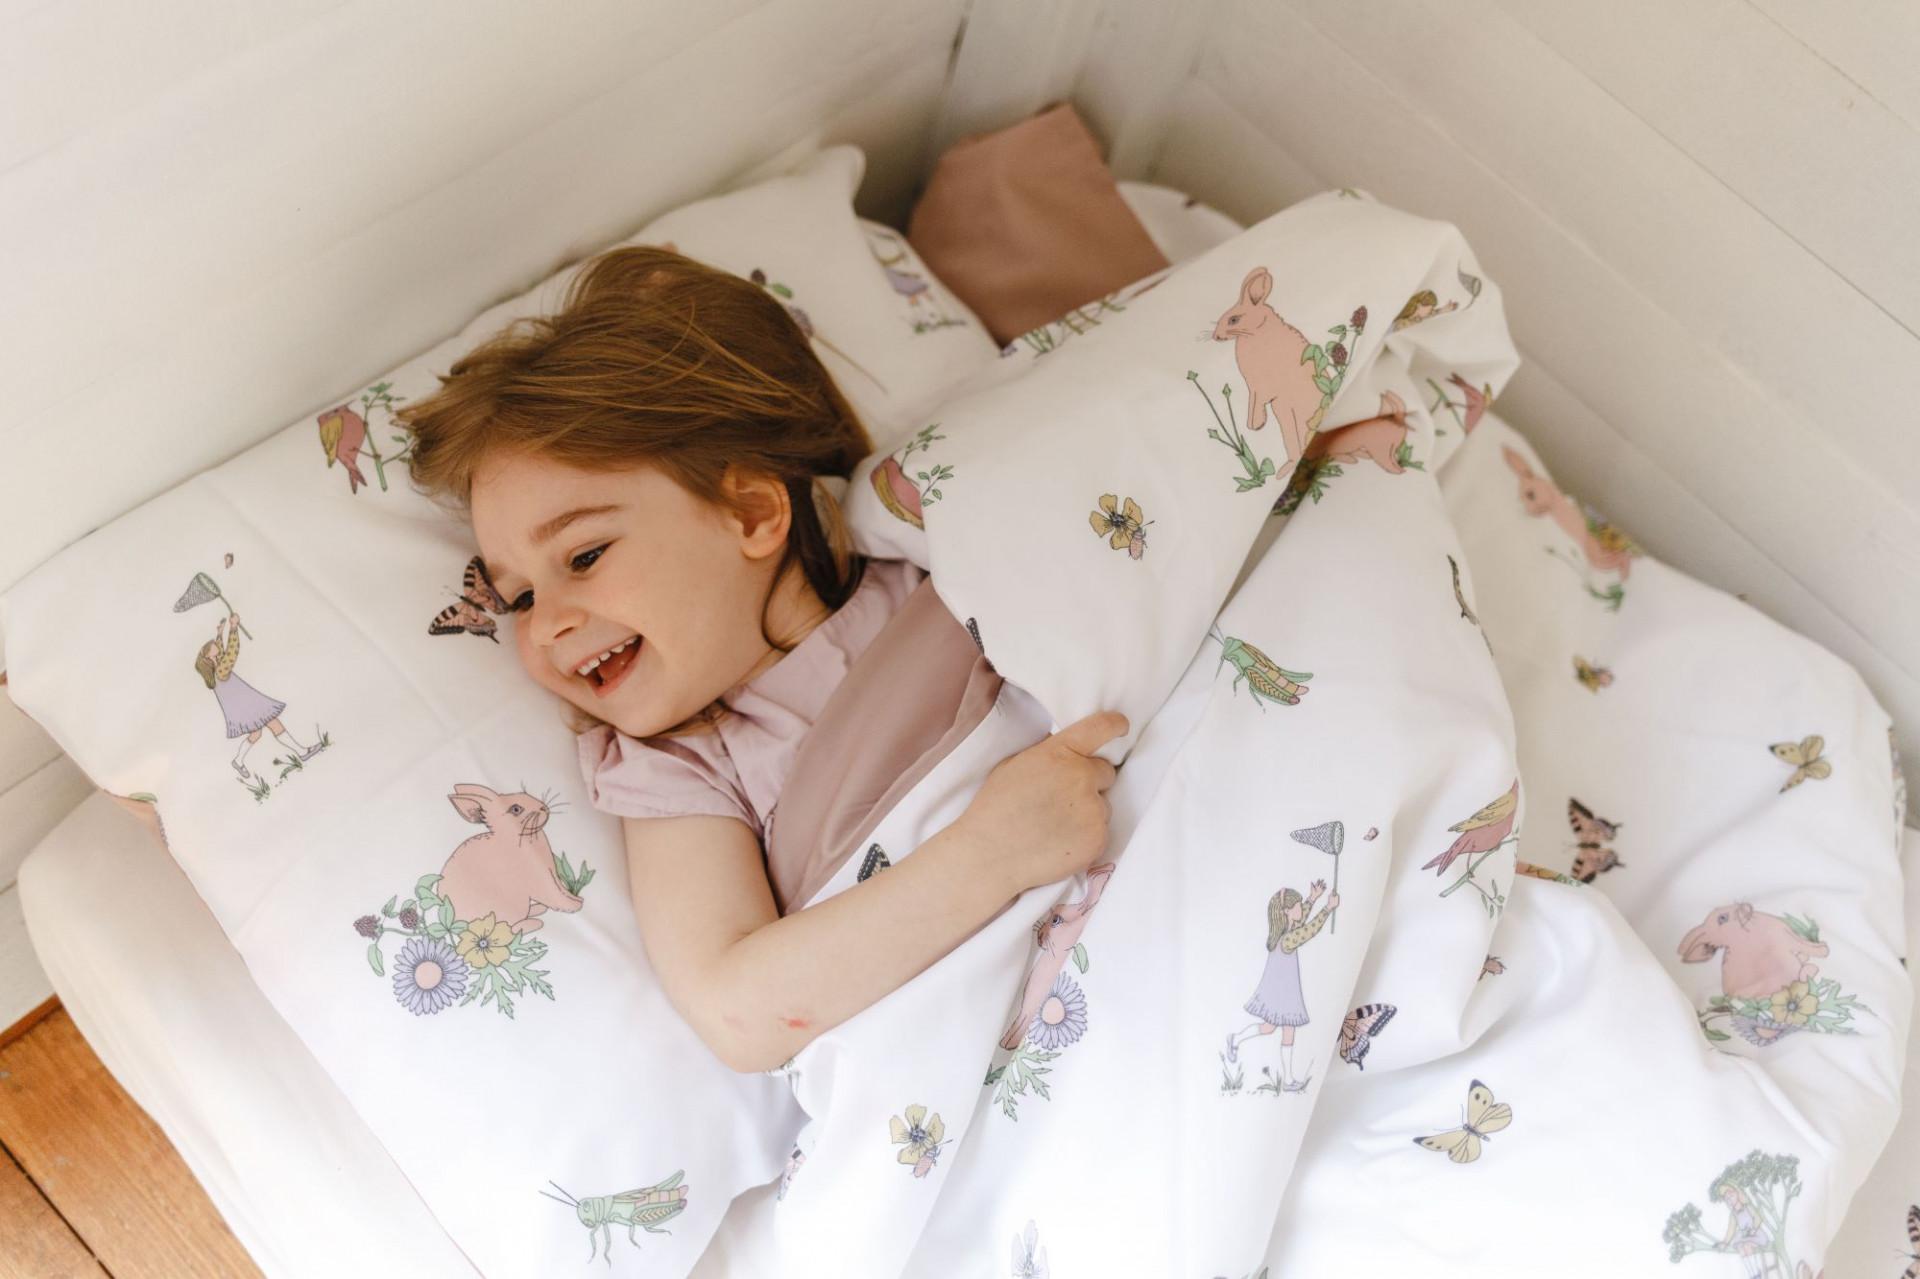 Apart from a regular sleep routine, choosing the right bedding will ensure your child gets good quality sleep.